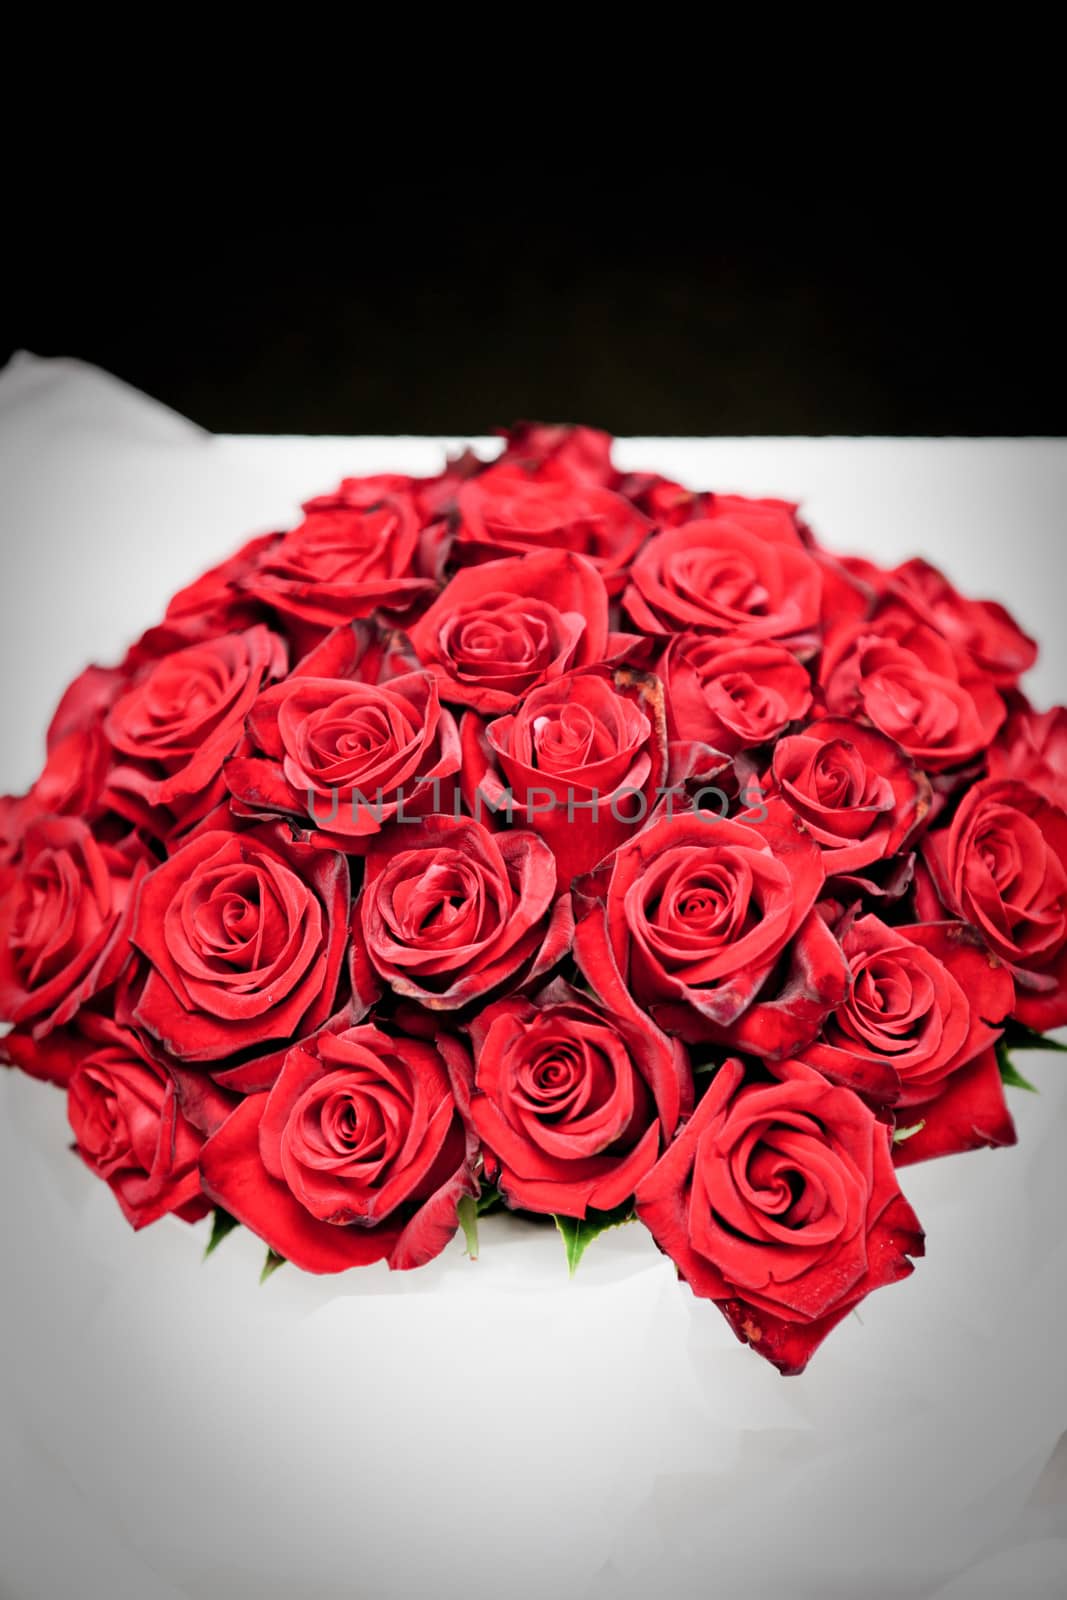 Beautiful circular bridal bouquet of fresh perfect red roses , closeup view with copyspace